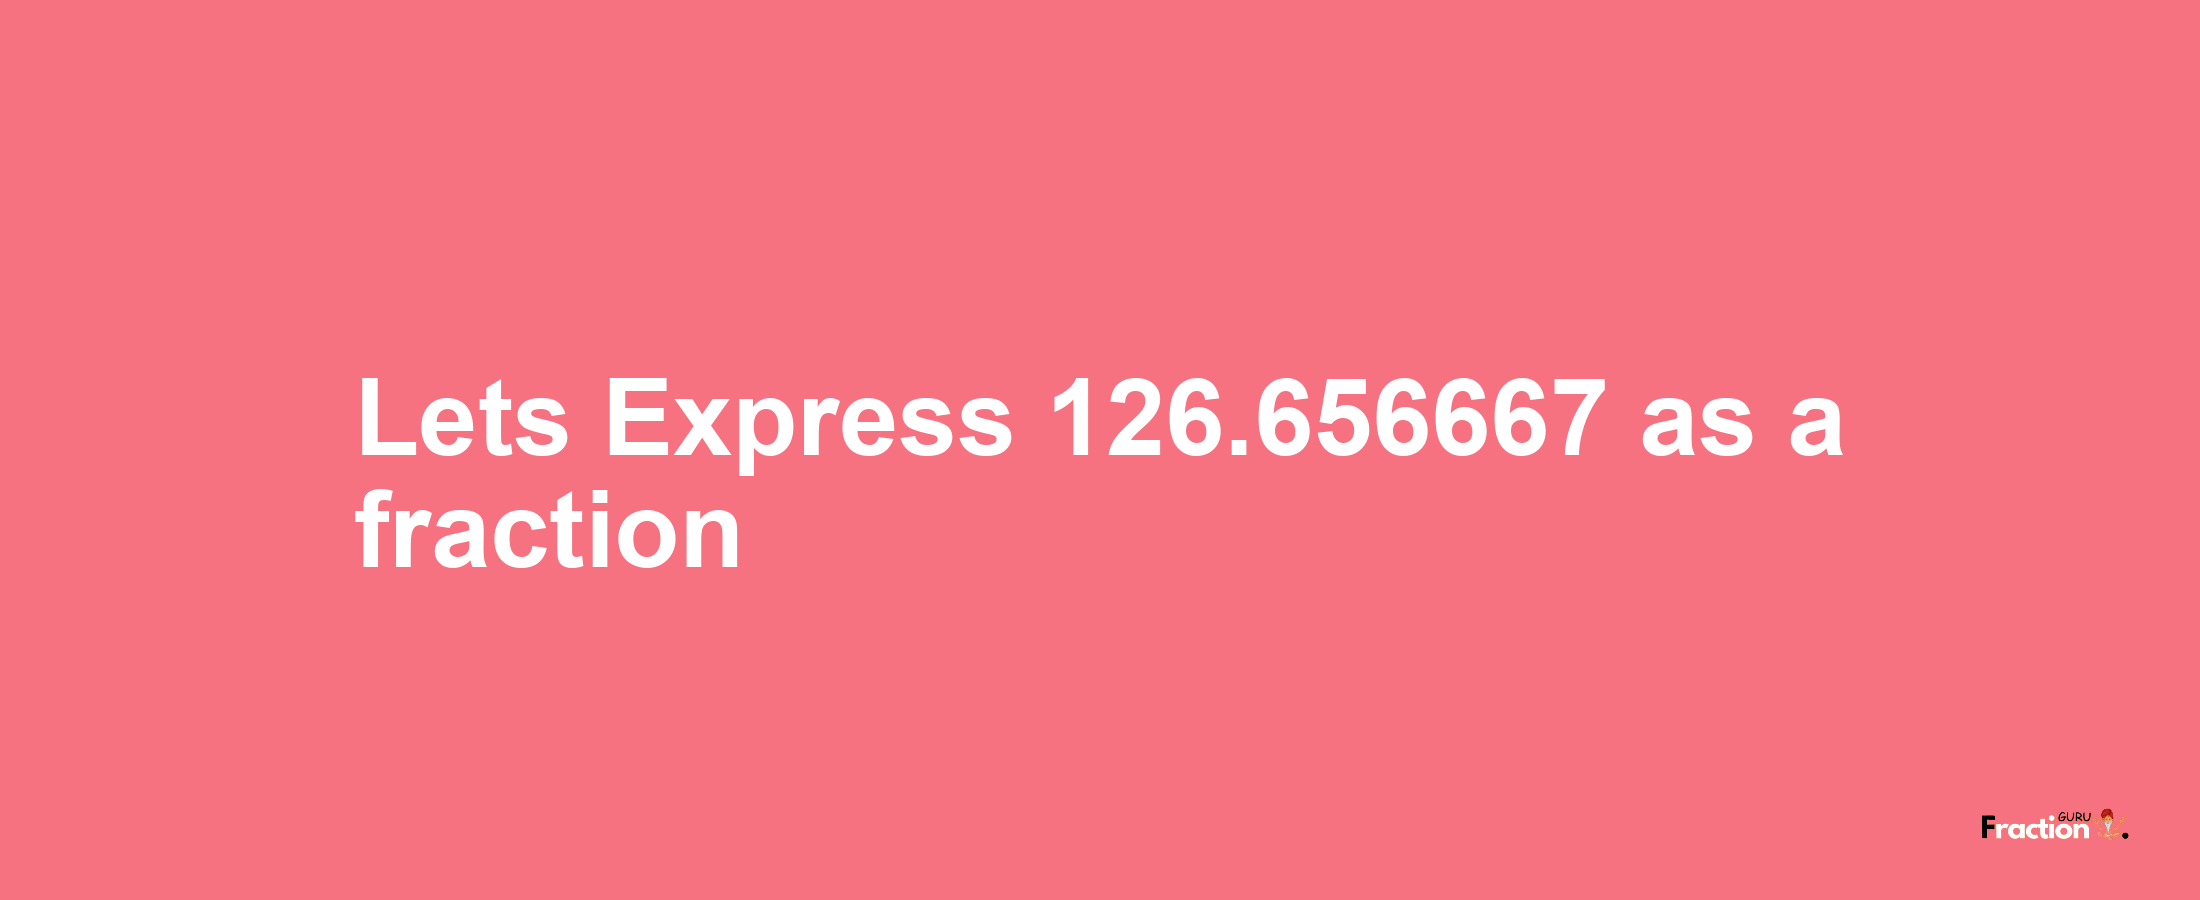 Lets Express 126.656667 as afraction